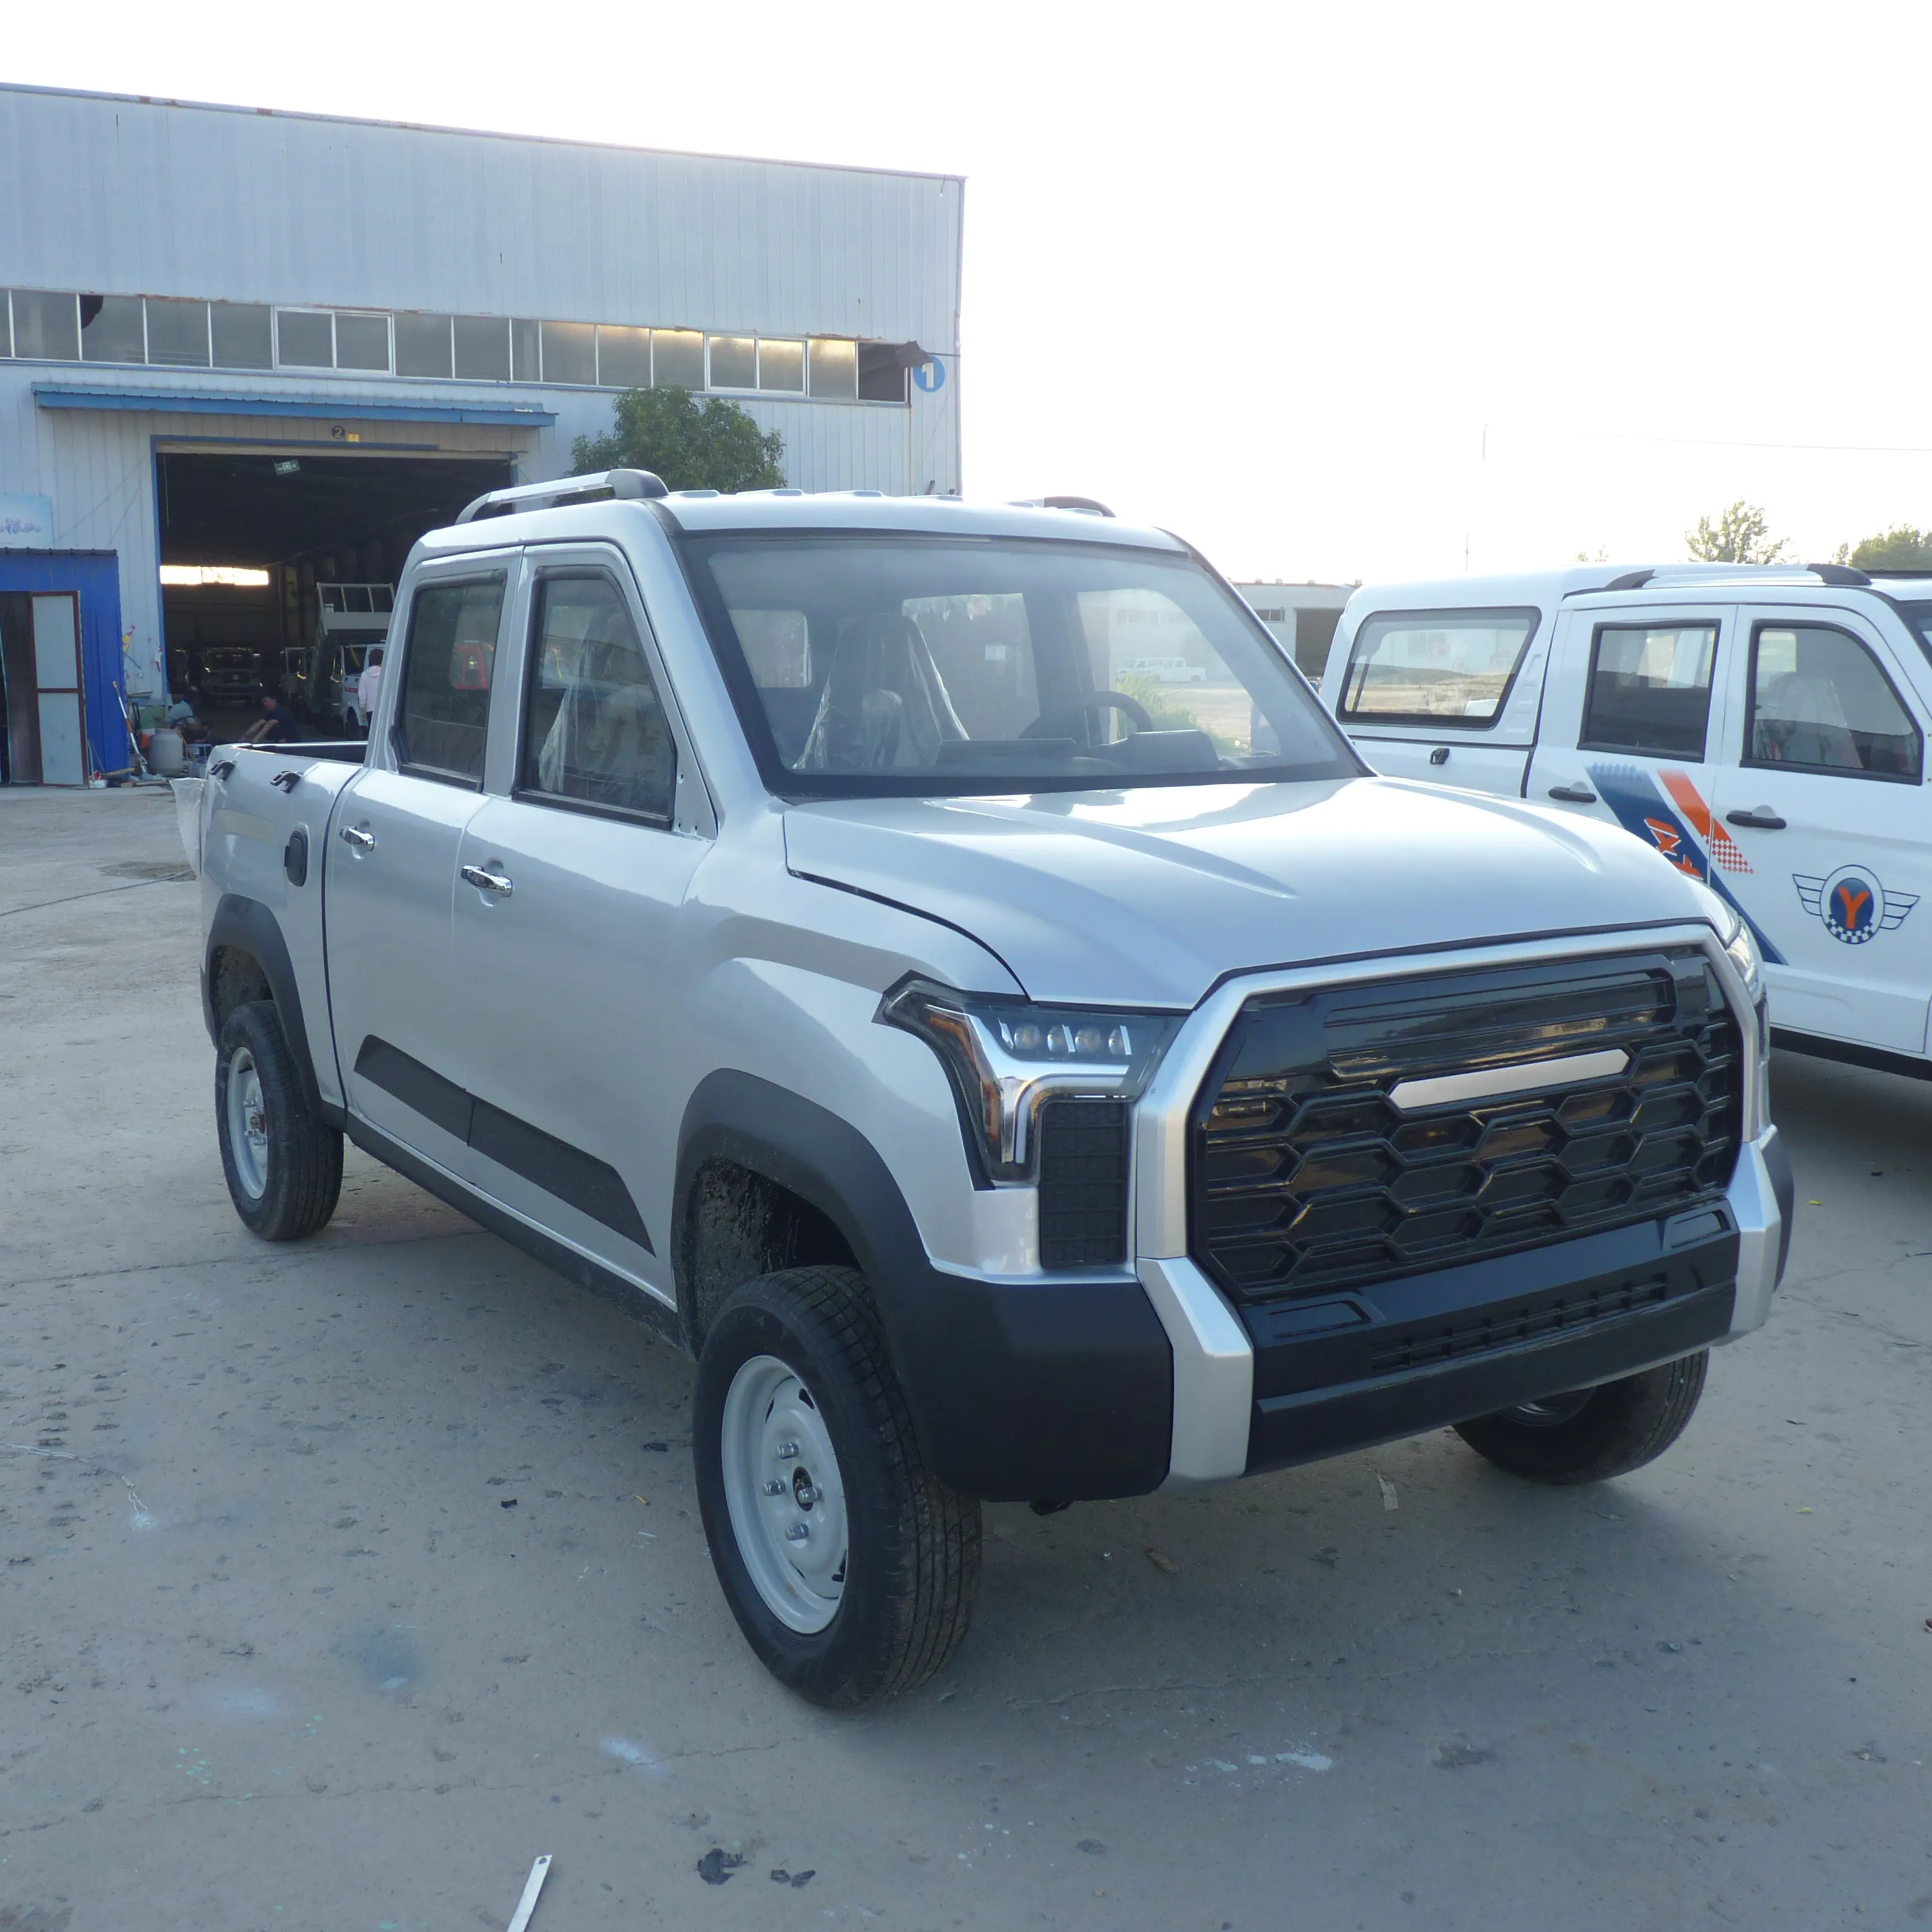 2023 New Electric pickup Car electric truck 4x4 Electric Utility Vehicle with Cargo Box pickup truck